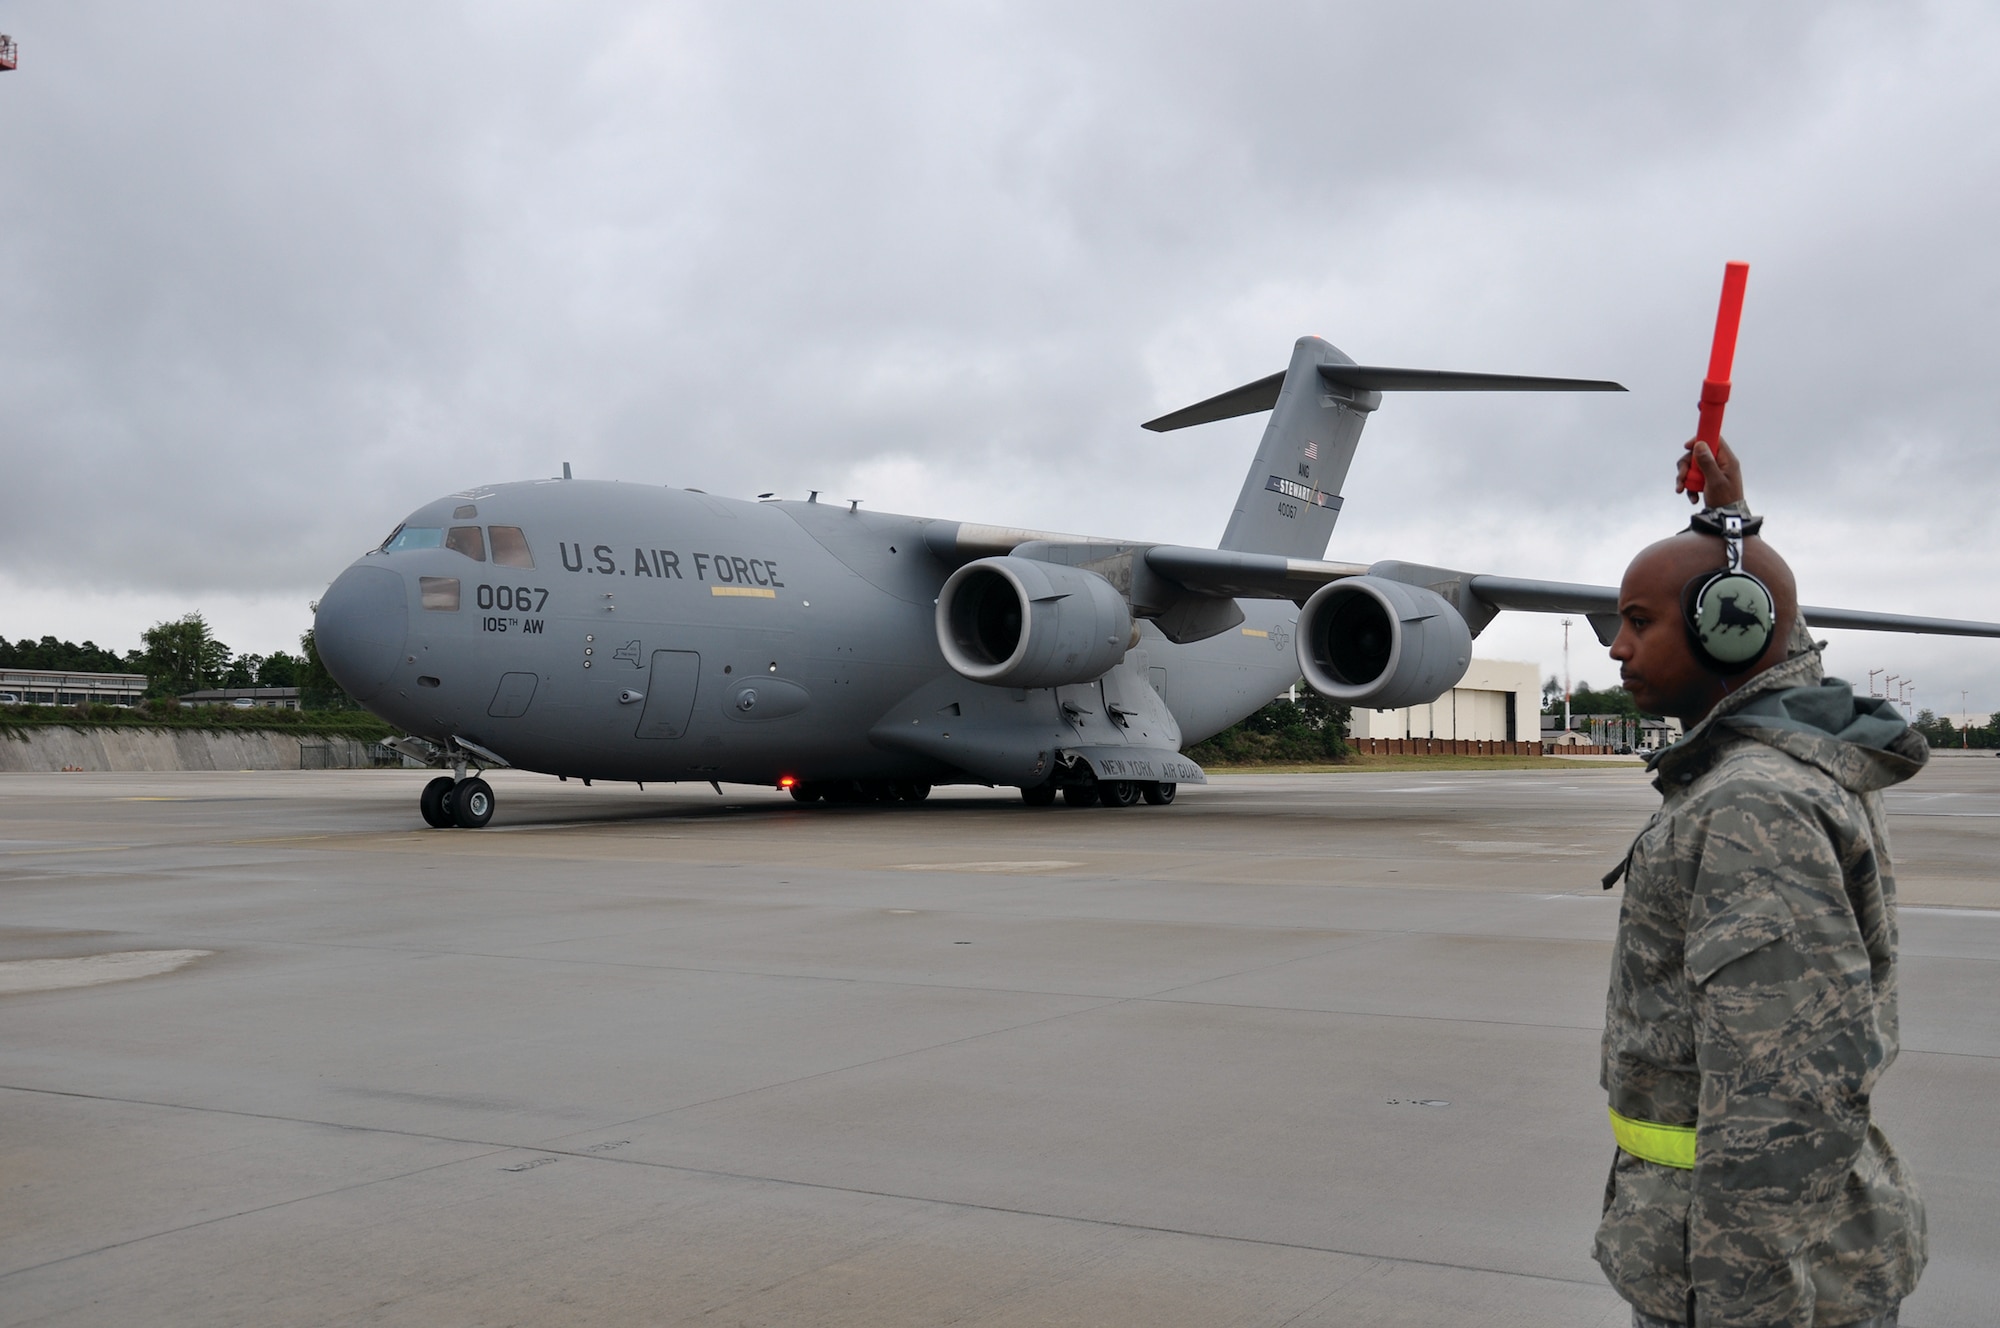 RAMSTEIN AIR BASE, Germany - Tech. Sgt. Keric Johnson, 445th Aircraft Maintenance Squadron C-17 Globemaster III crew chief, marshals in a C-17 at Ramstein Air Base, Germany, July 10, 2014. The 445 AMXS sent 20 maintainers to Germany to serve annual tour time July 7-21. (U.S. Air Force photo/Capt. Elizabeth Caraway)